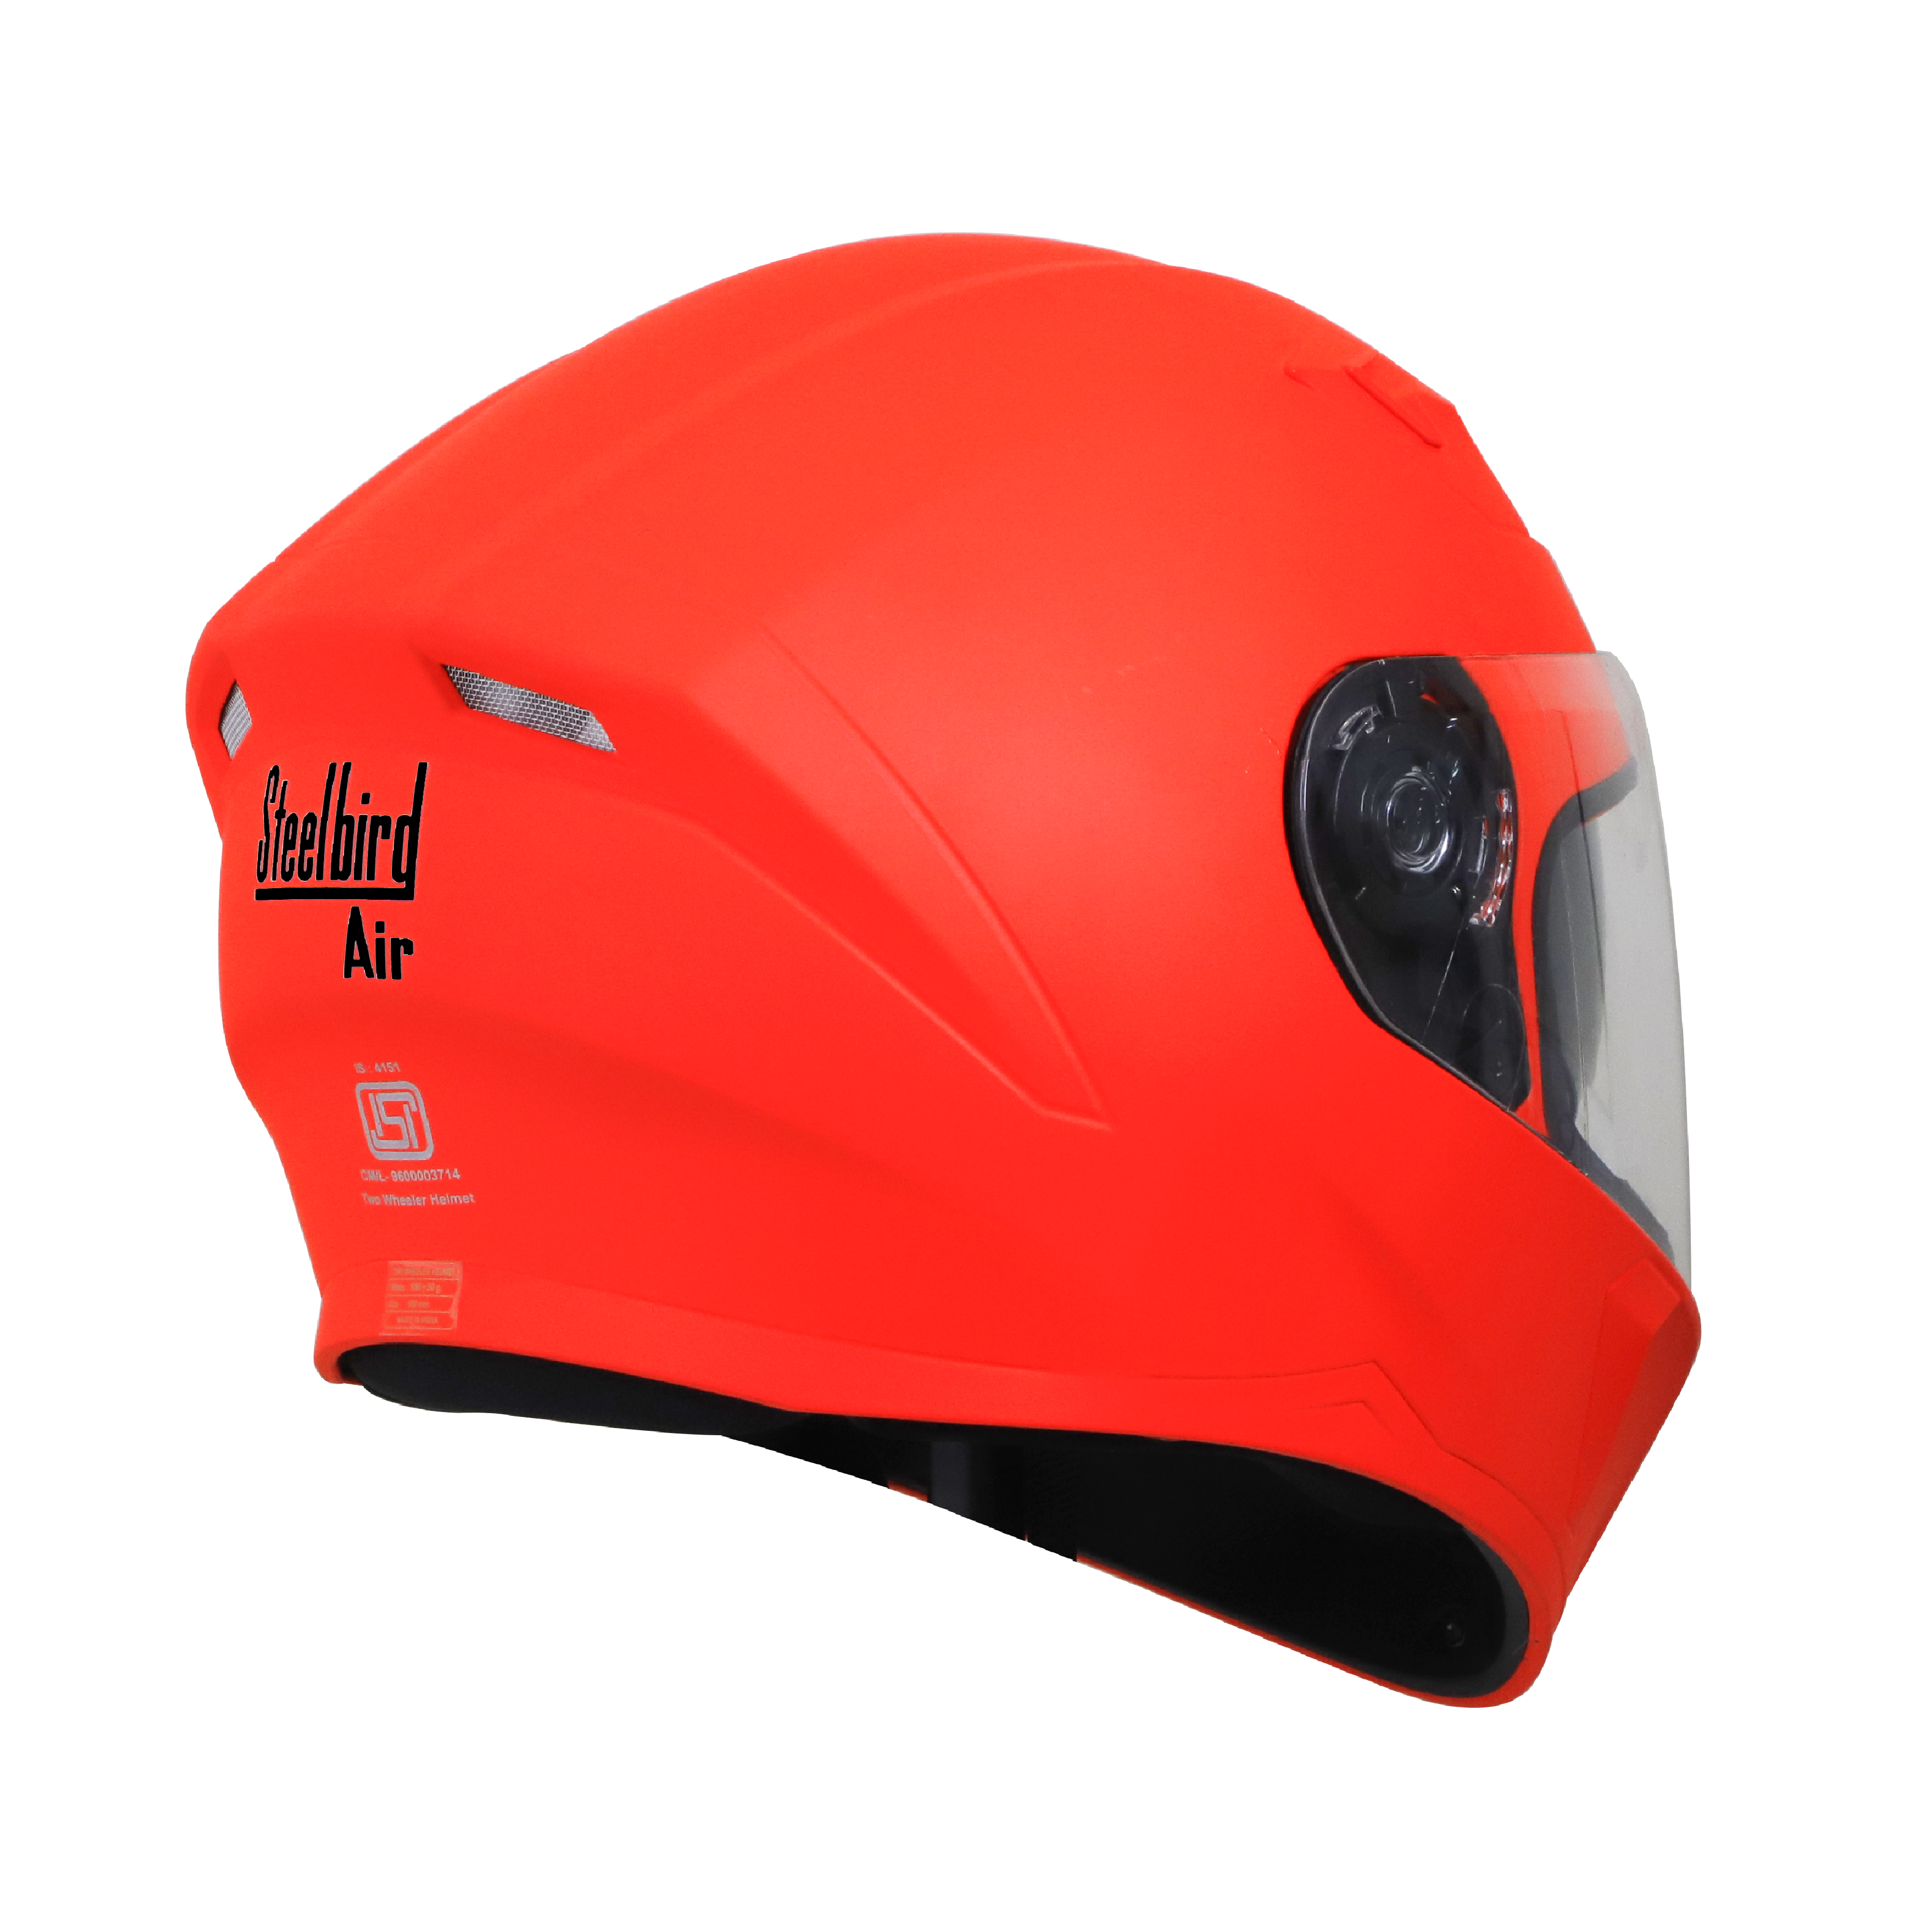 SBA-21 VFX GLOSSY FLUO RED WITH CHROME SILVER INNER SUN SHIELD